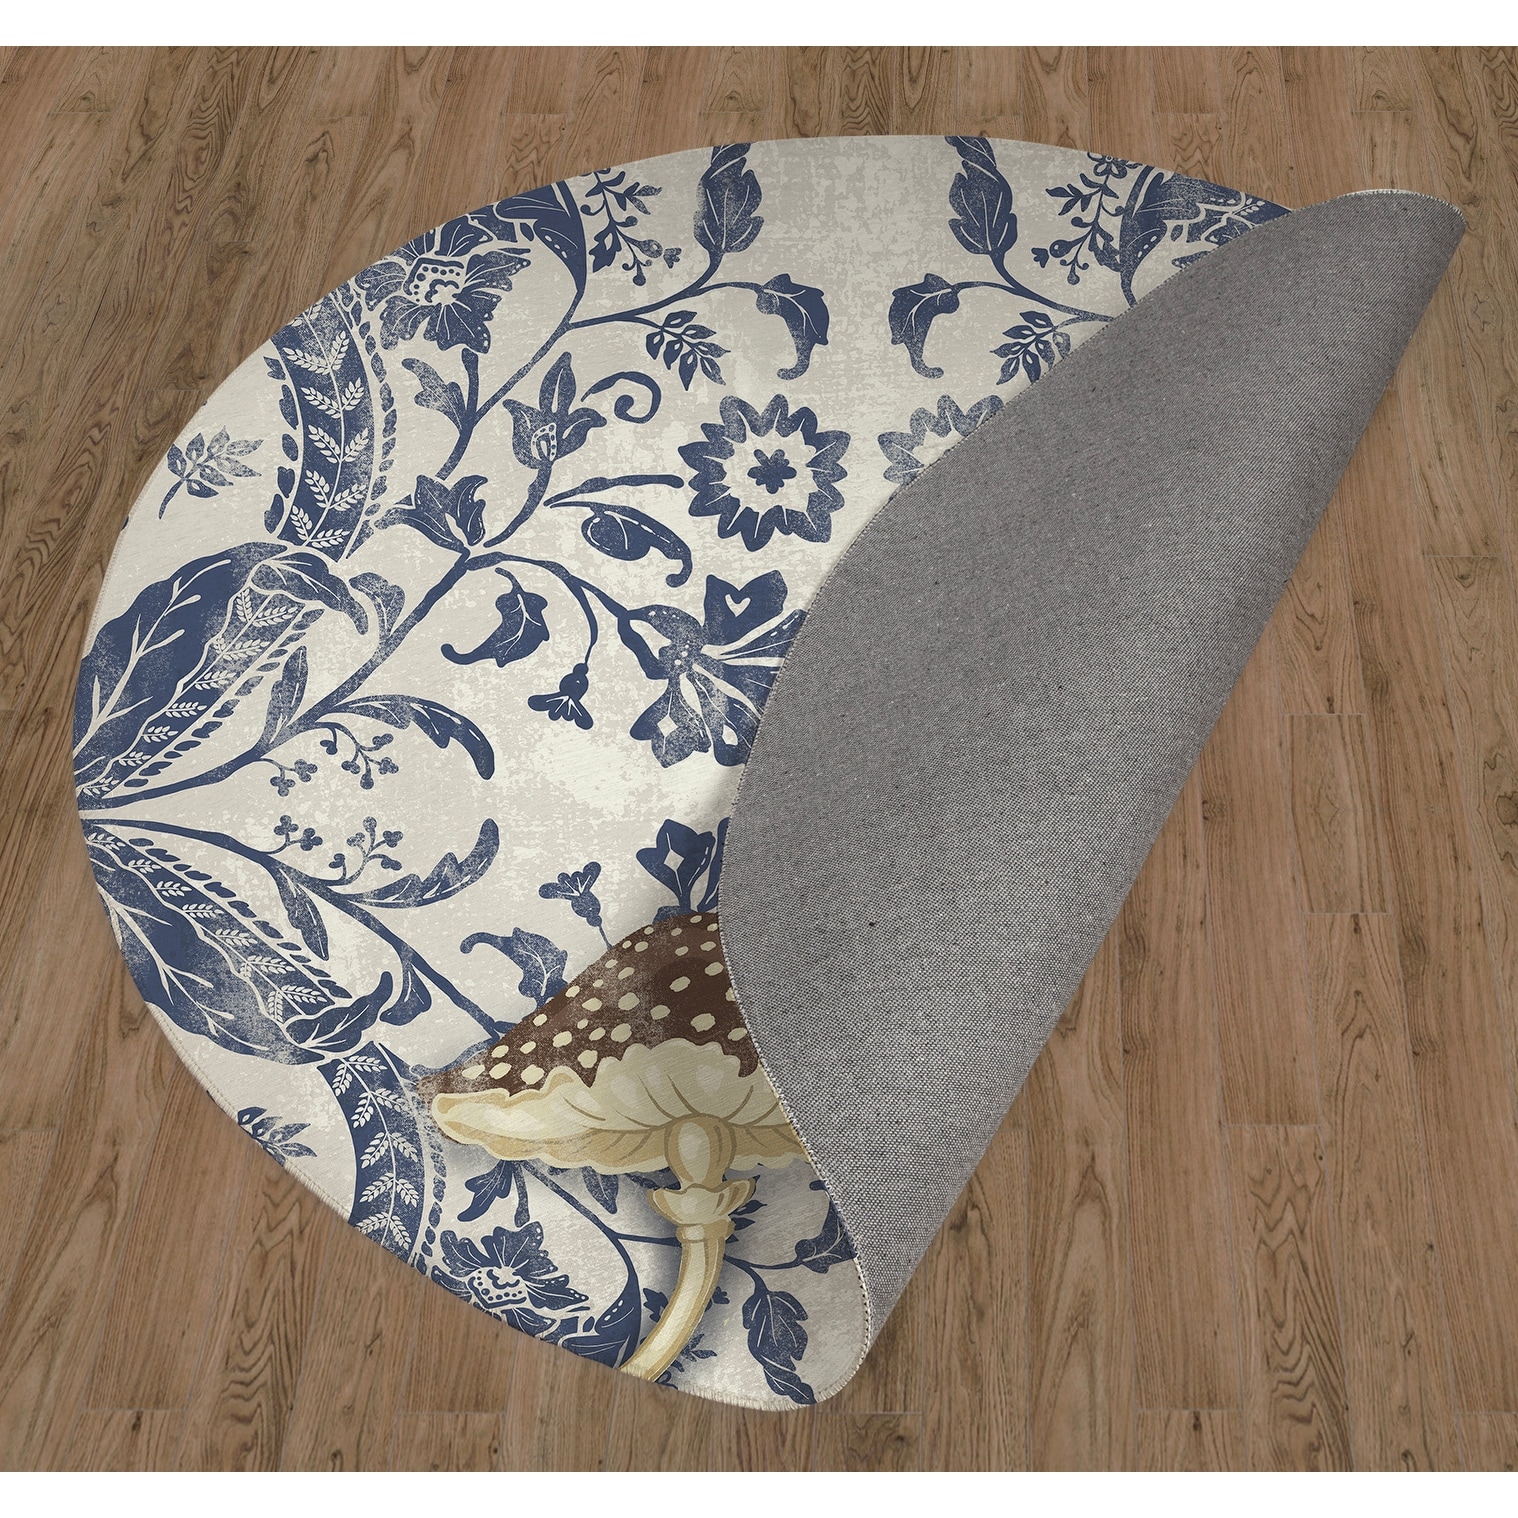 https://ak1.ostkcdn.com/images/products/is/images/direct/490d748e457ff27aaf68aaa5bccb643de625787b/IN-THE-WOODS-NAVY-Indoor-Floor-Mat-By-Kavka-Designs.jpg